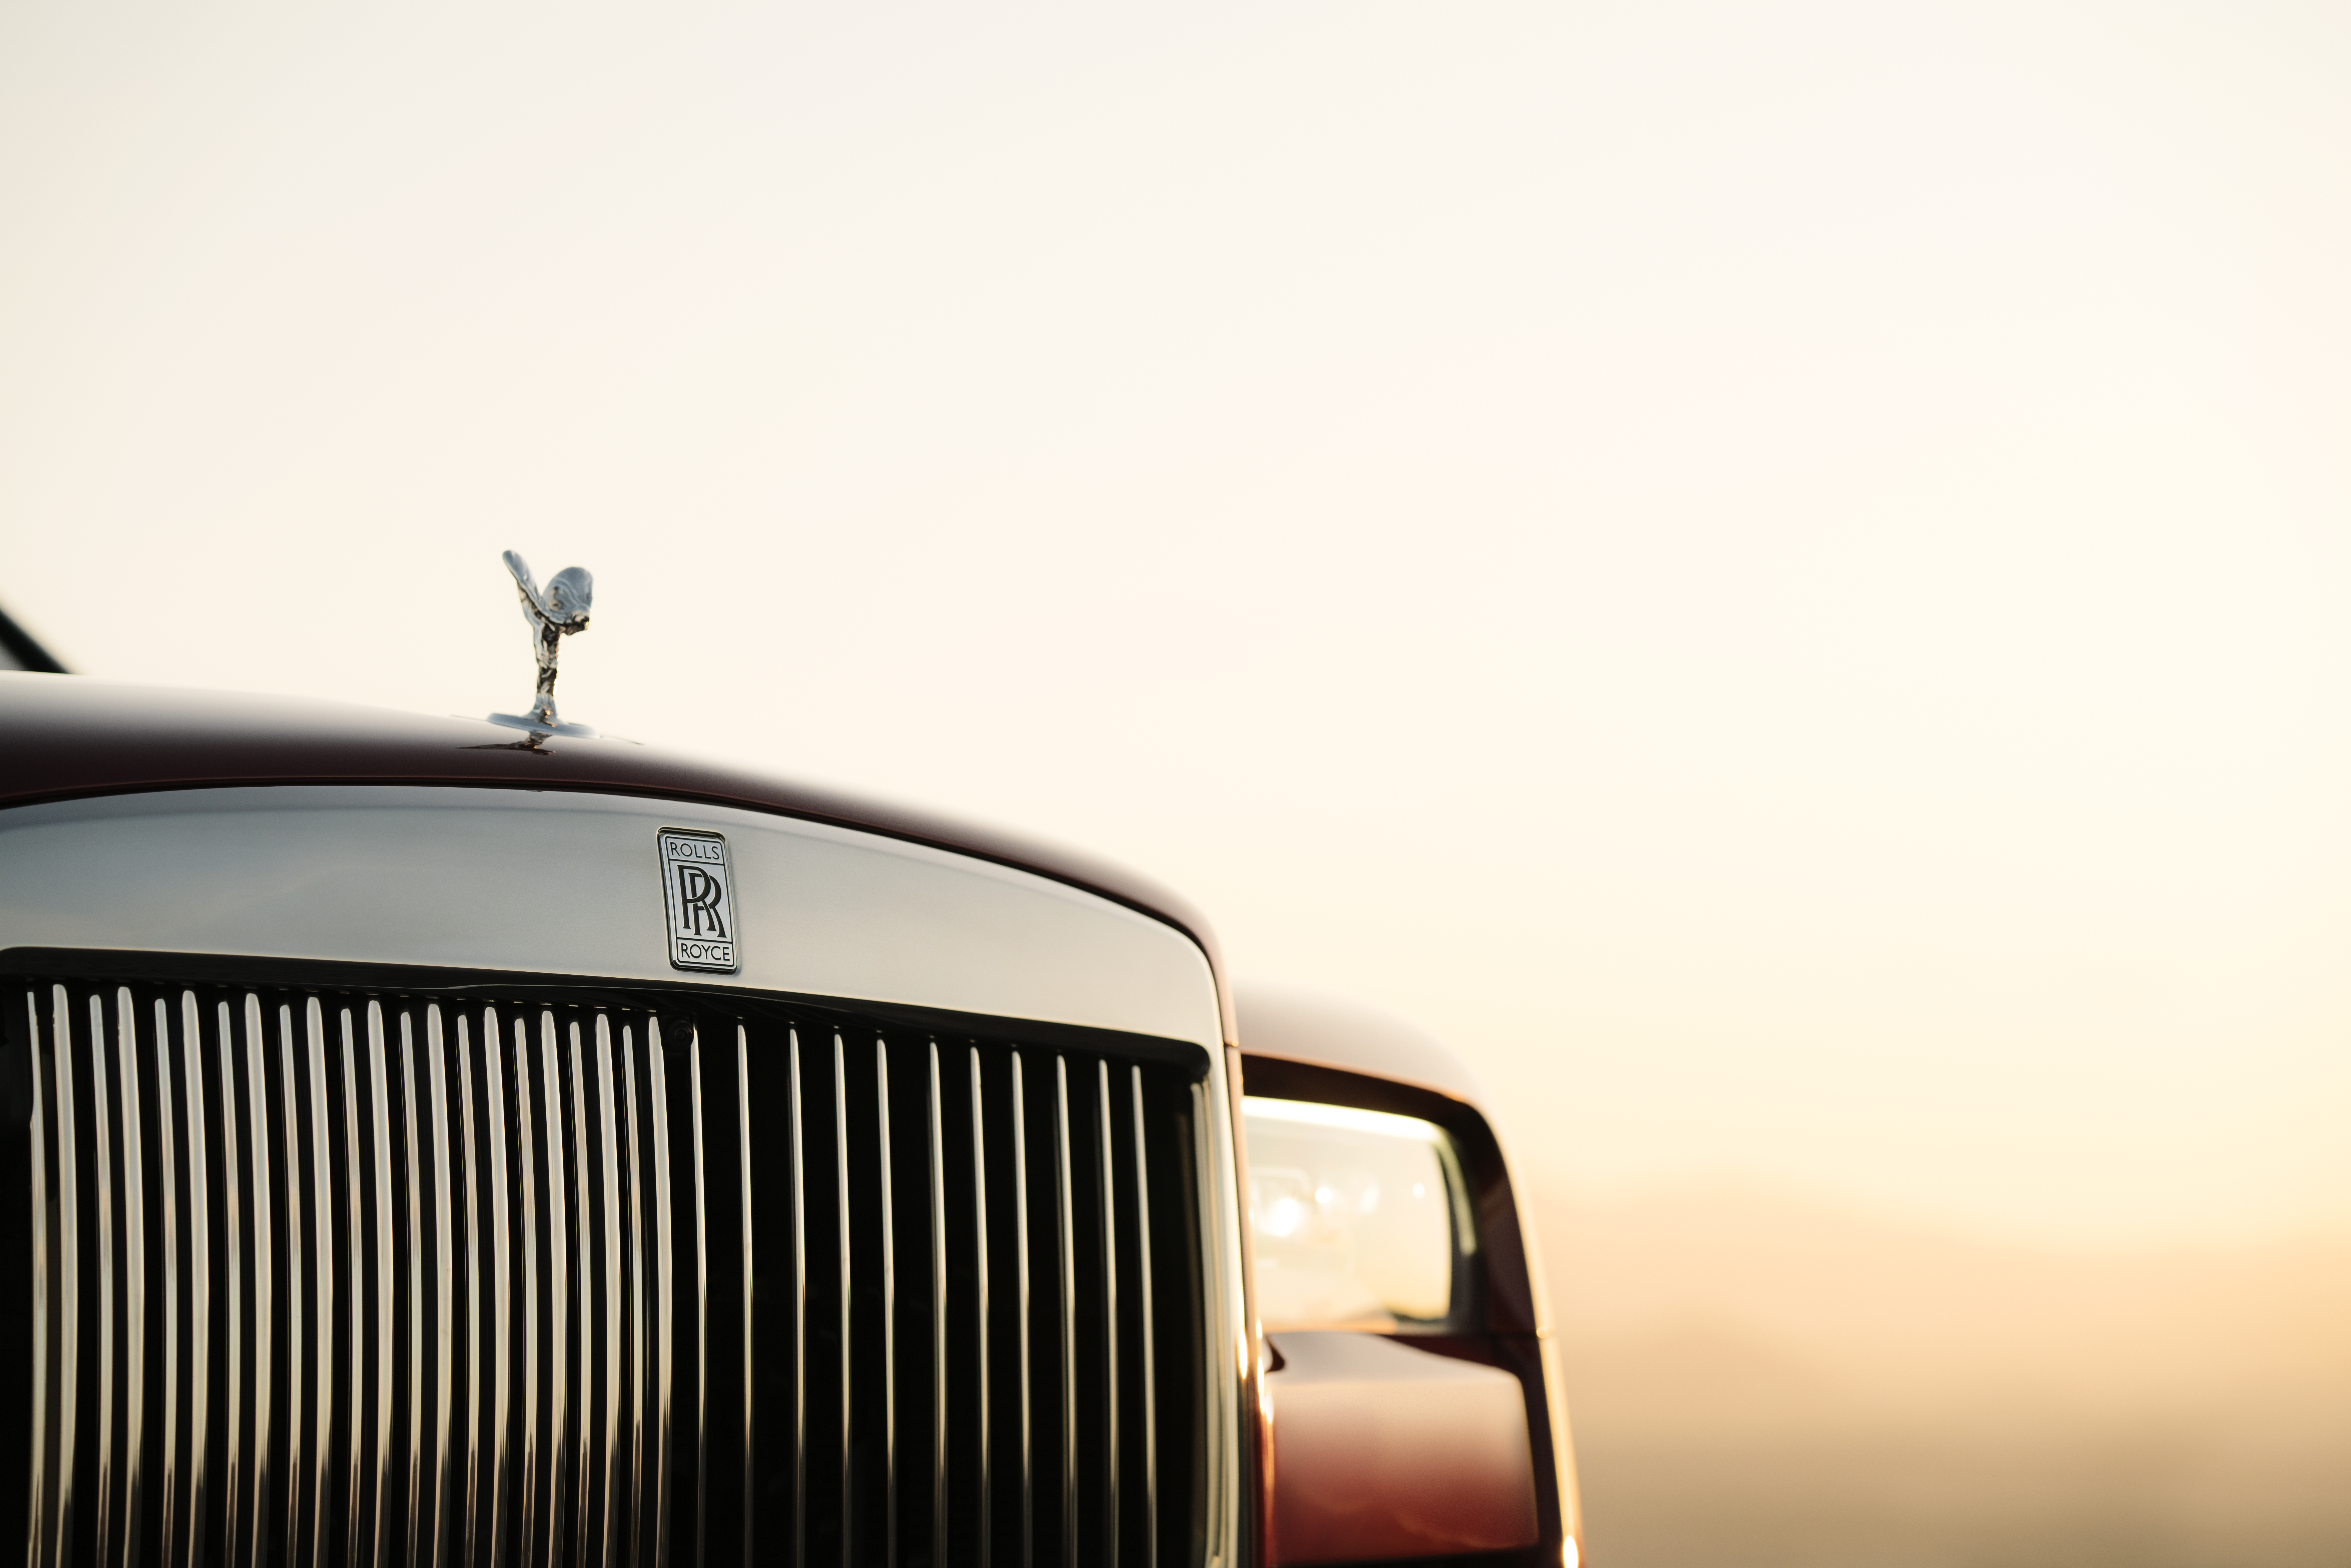 Cullinan: the Rolls-Royce of SUVs designed for the young